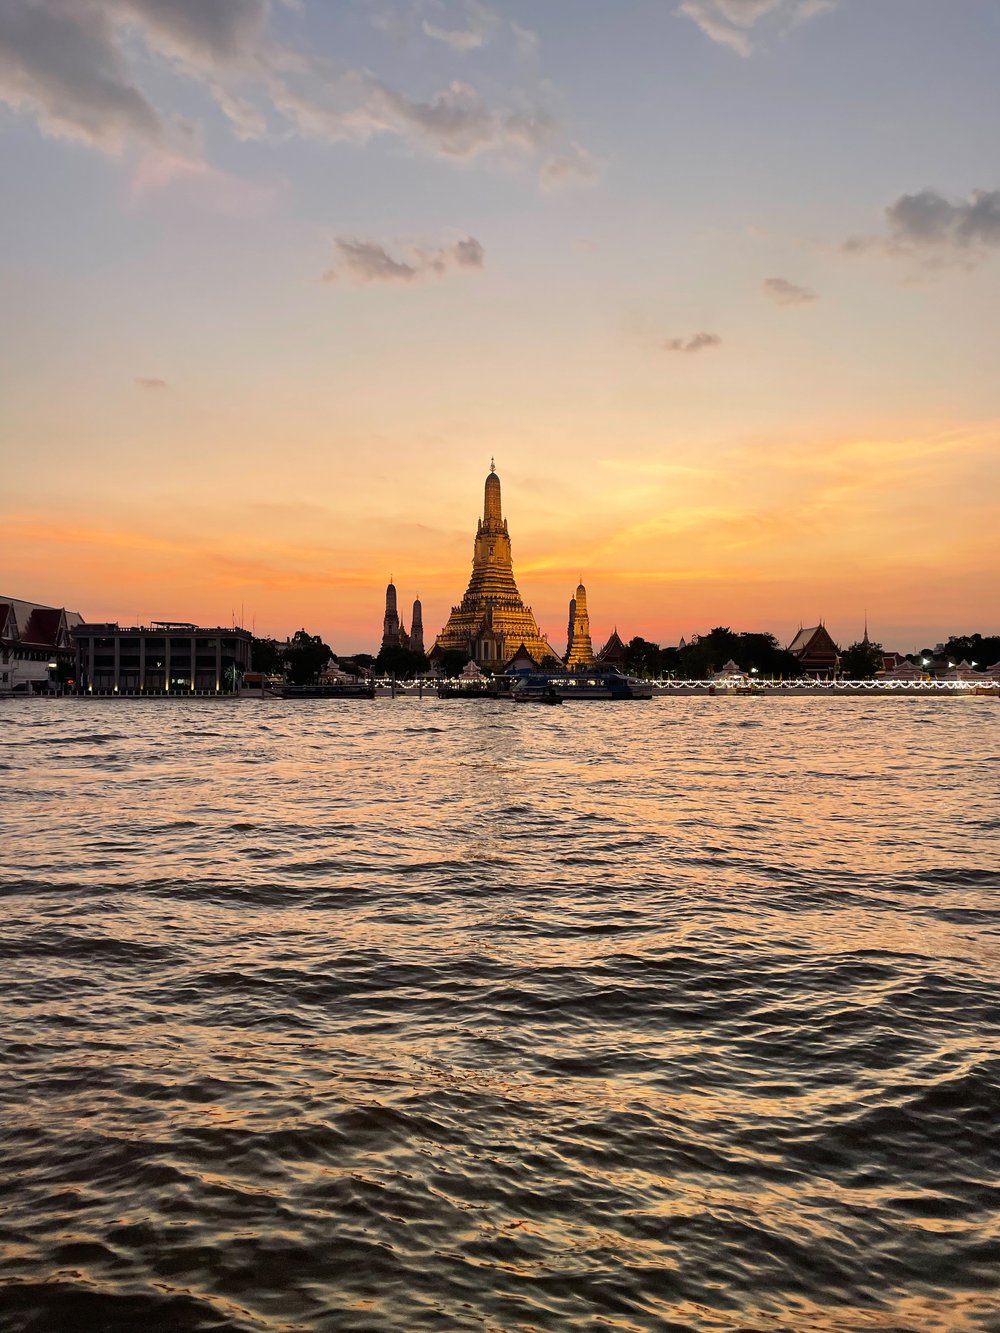 Wat Arun Temple seen from across the Chao Phraya river